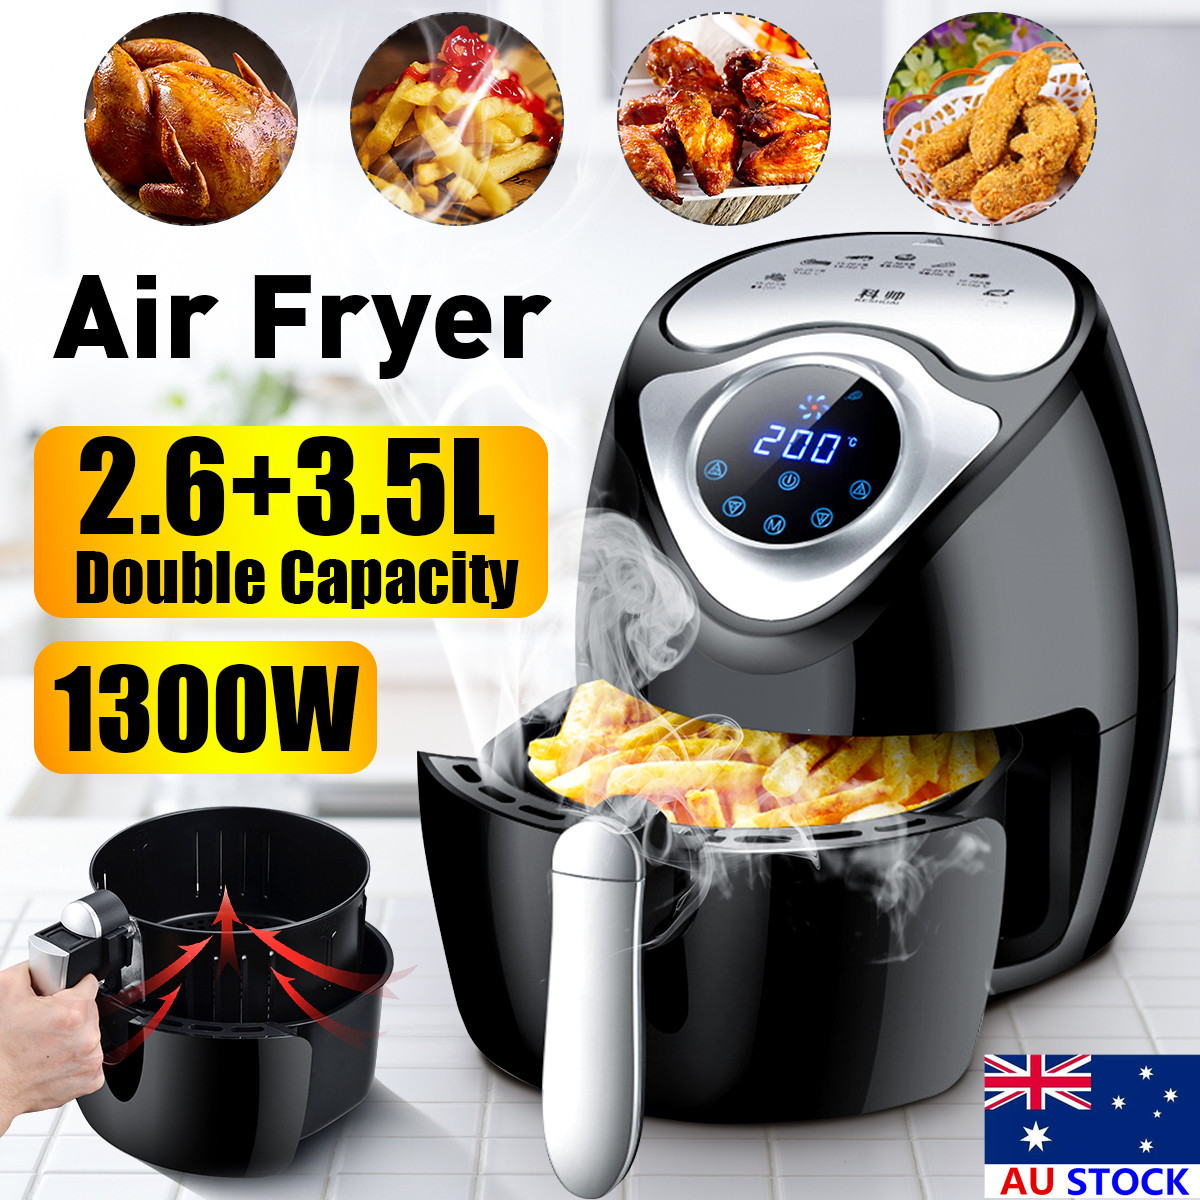 1700W-Electric-Air-Fryer-Digital-Timer-Temp-Control-61-Quart-Oil-free-Touch-Screen-Fried-Food-for-Ho-1658492-1